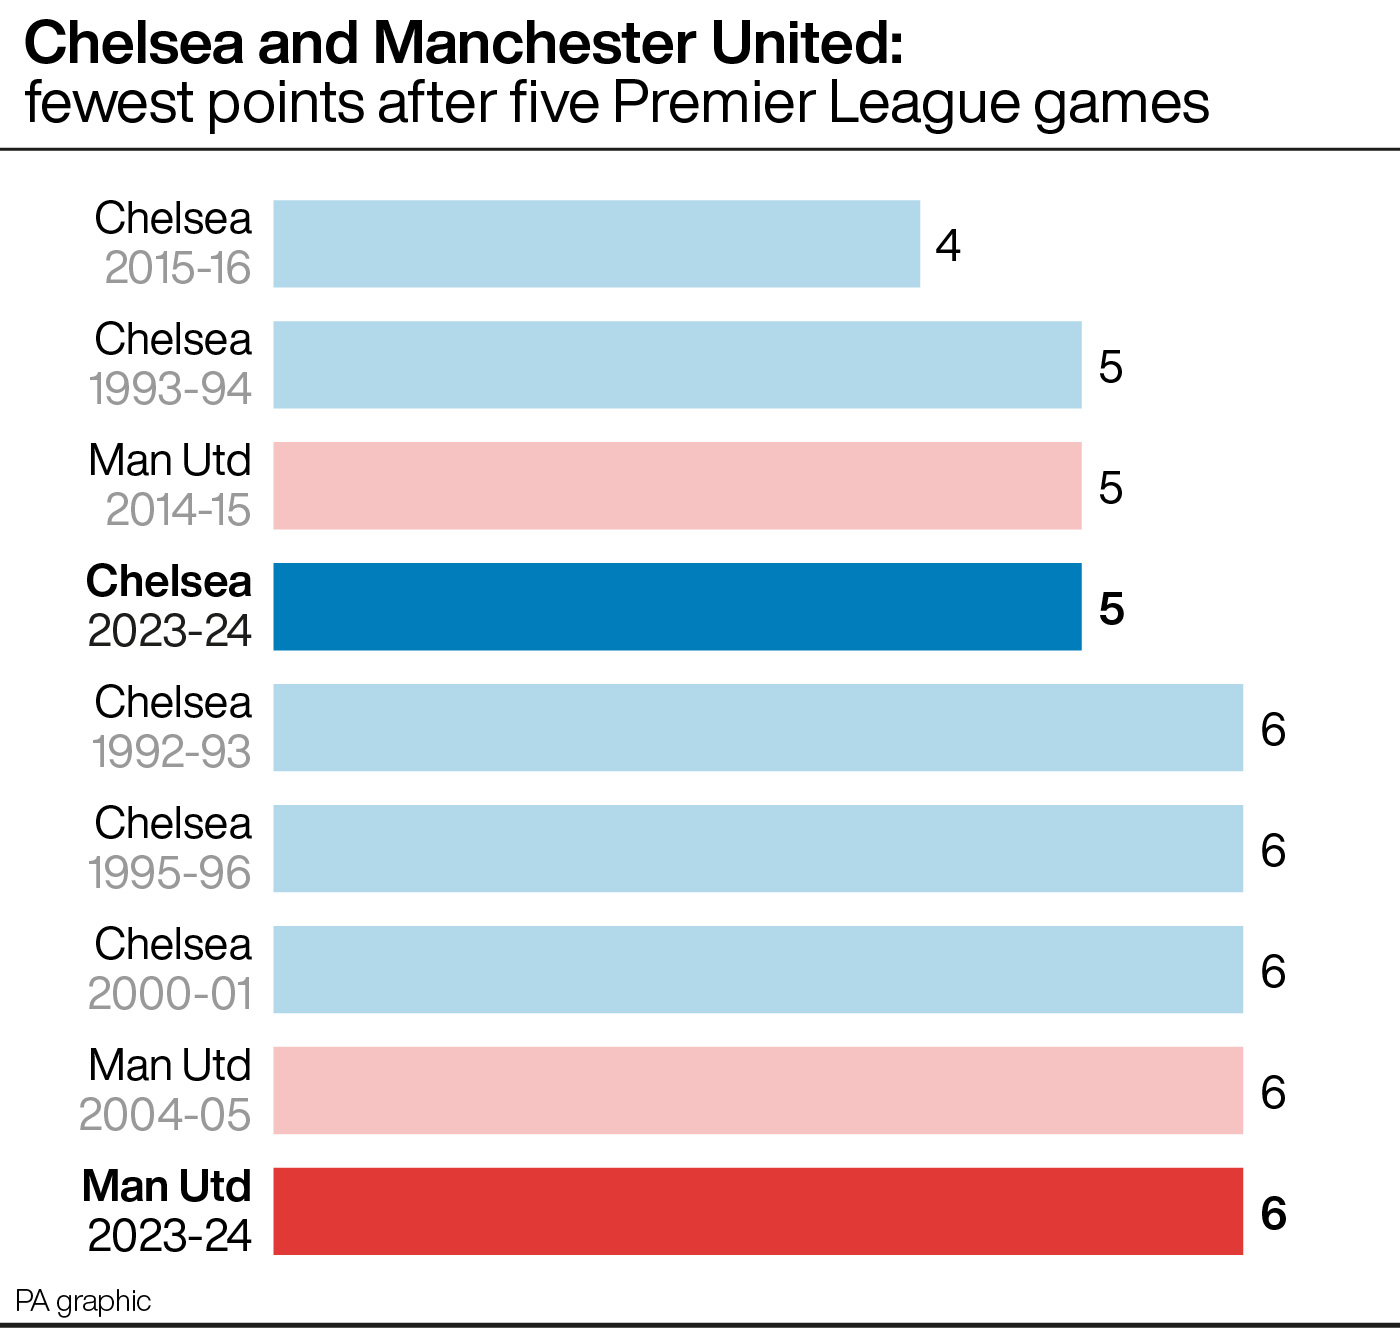 Chelsea and Manchester United: fewest points after five Premier League games (graphic)